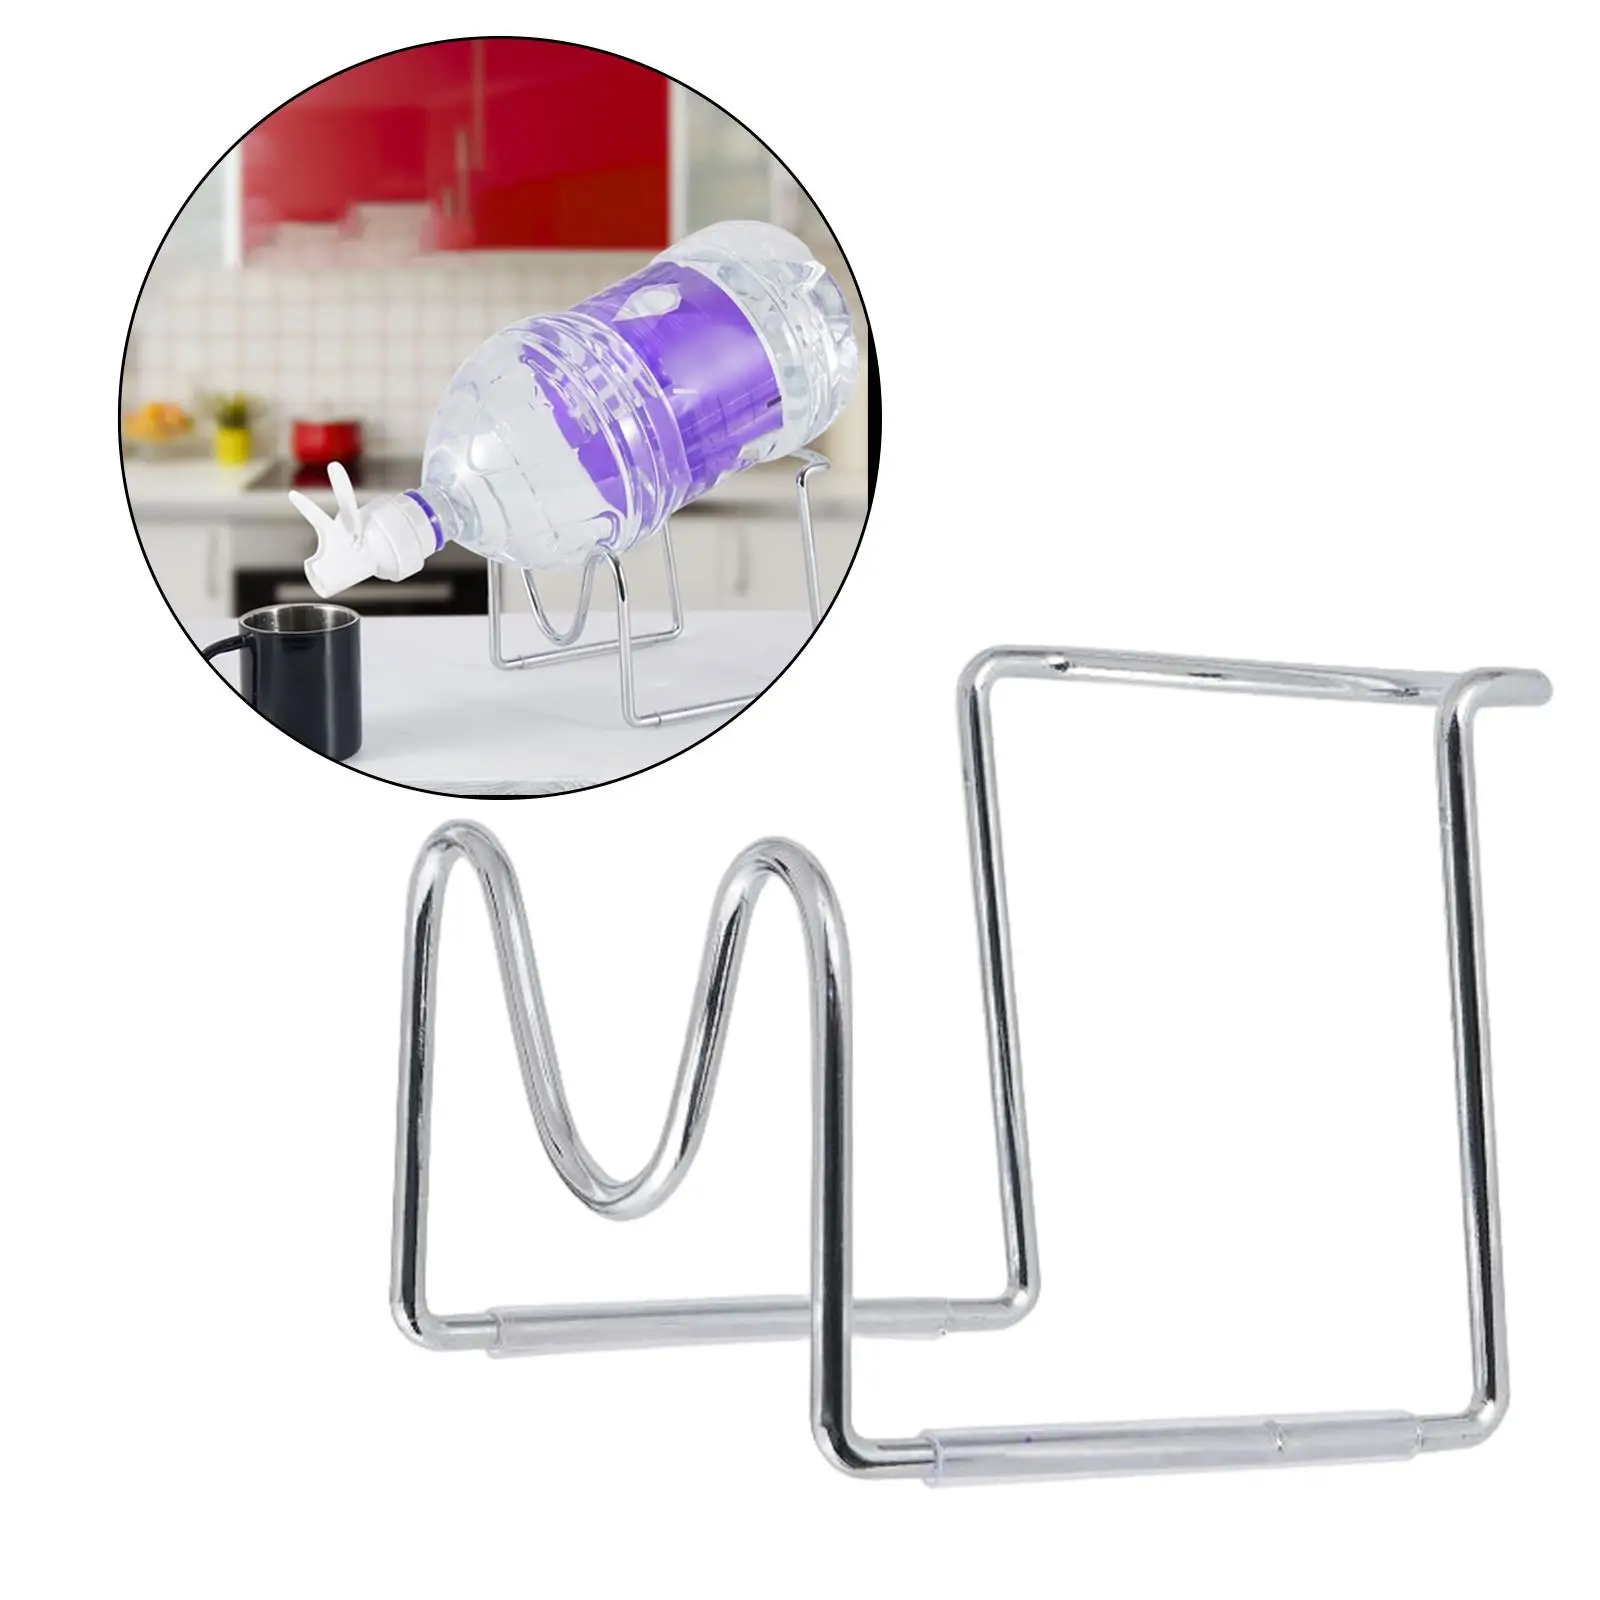 5L Water Bottle Holder Water Dispenser Stand Beverage Holder Cradle Rack Beverage Bracket Water Jug Stand for Kitchen